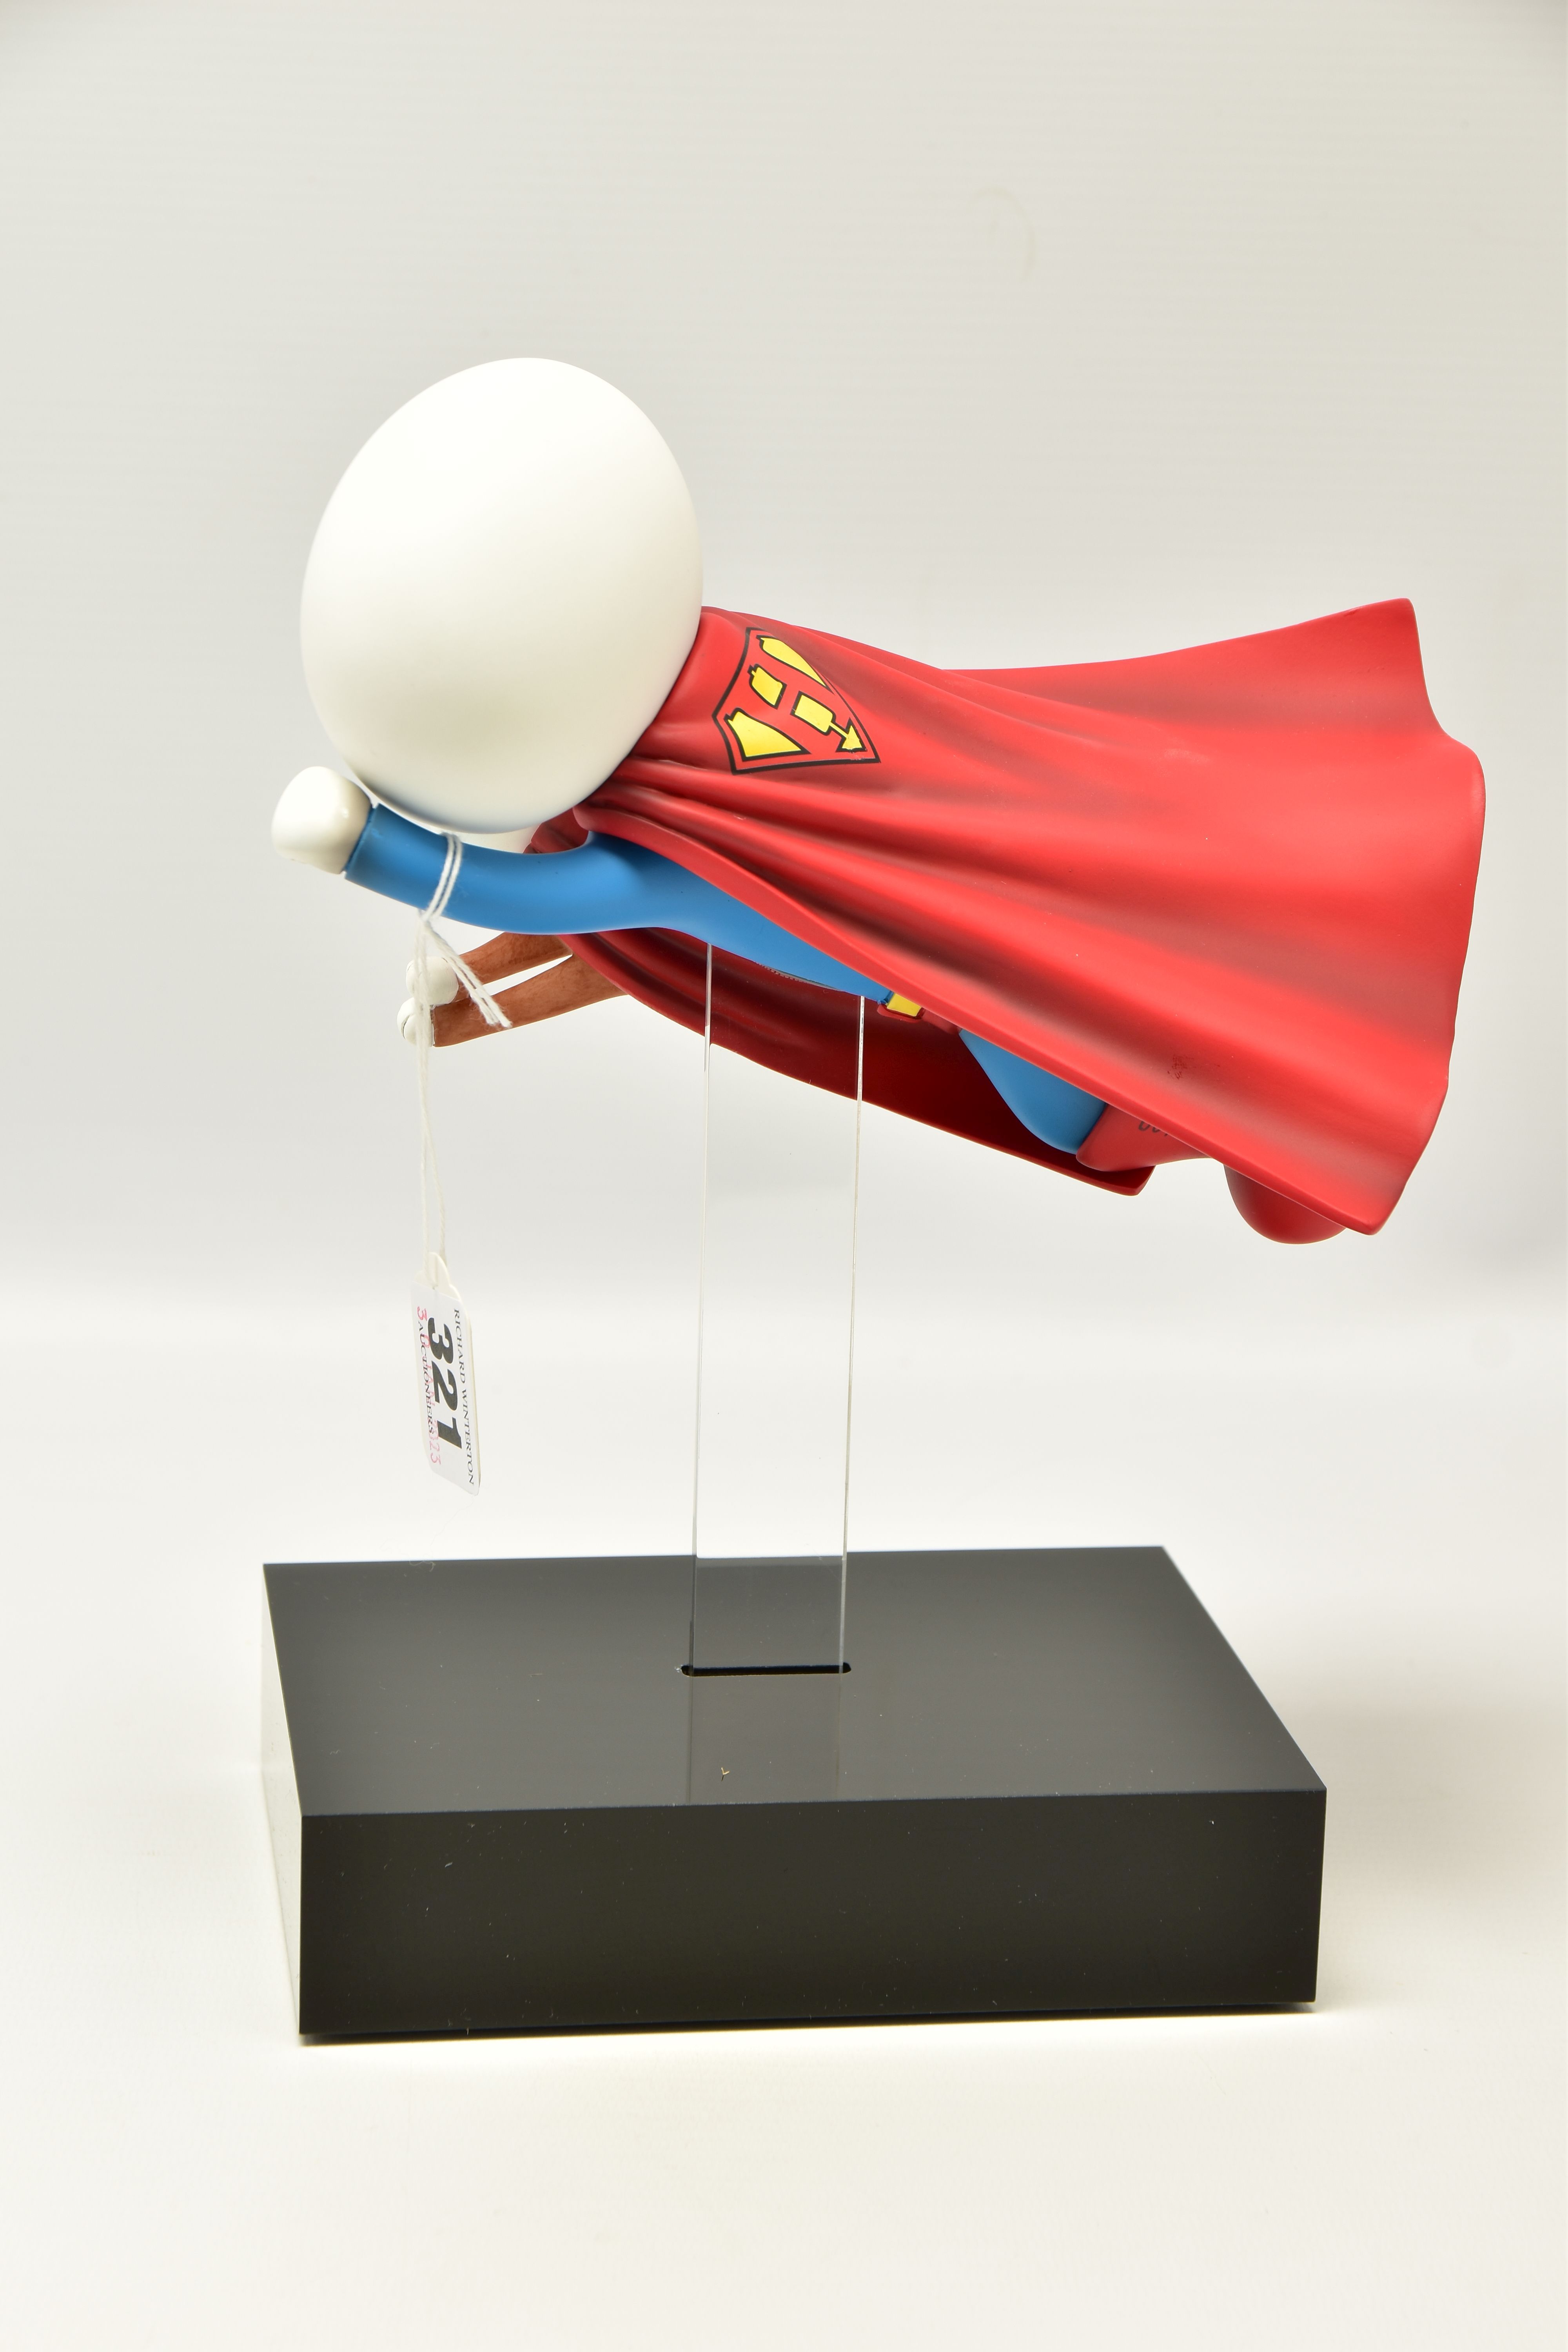 DOUG HYDE (BRITISH 1972) 'IS IT A BIRD? IS IT A PLANE?' a limited edition cold cast porcelain - Image 4 of 6